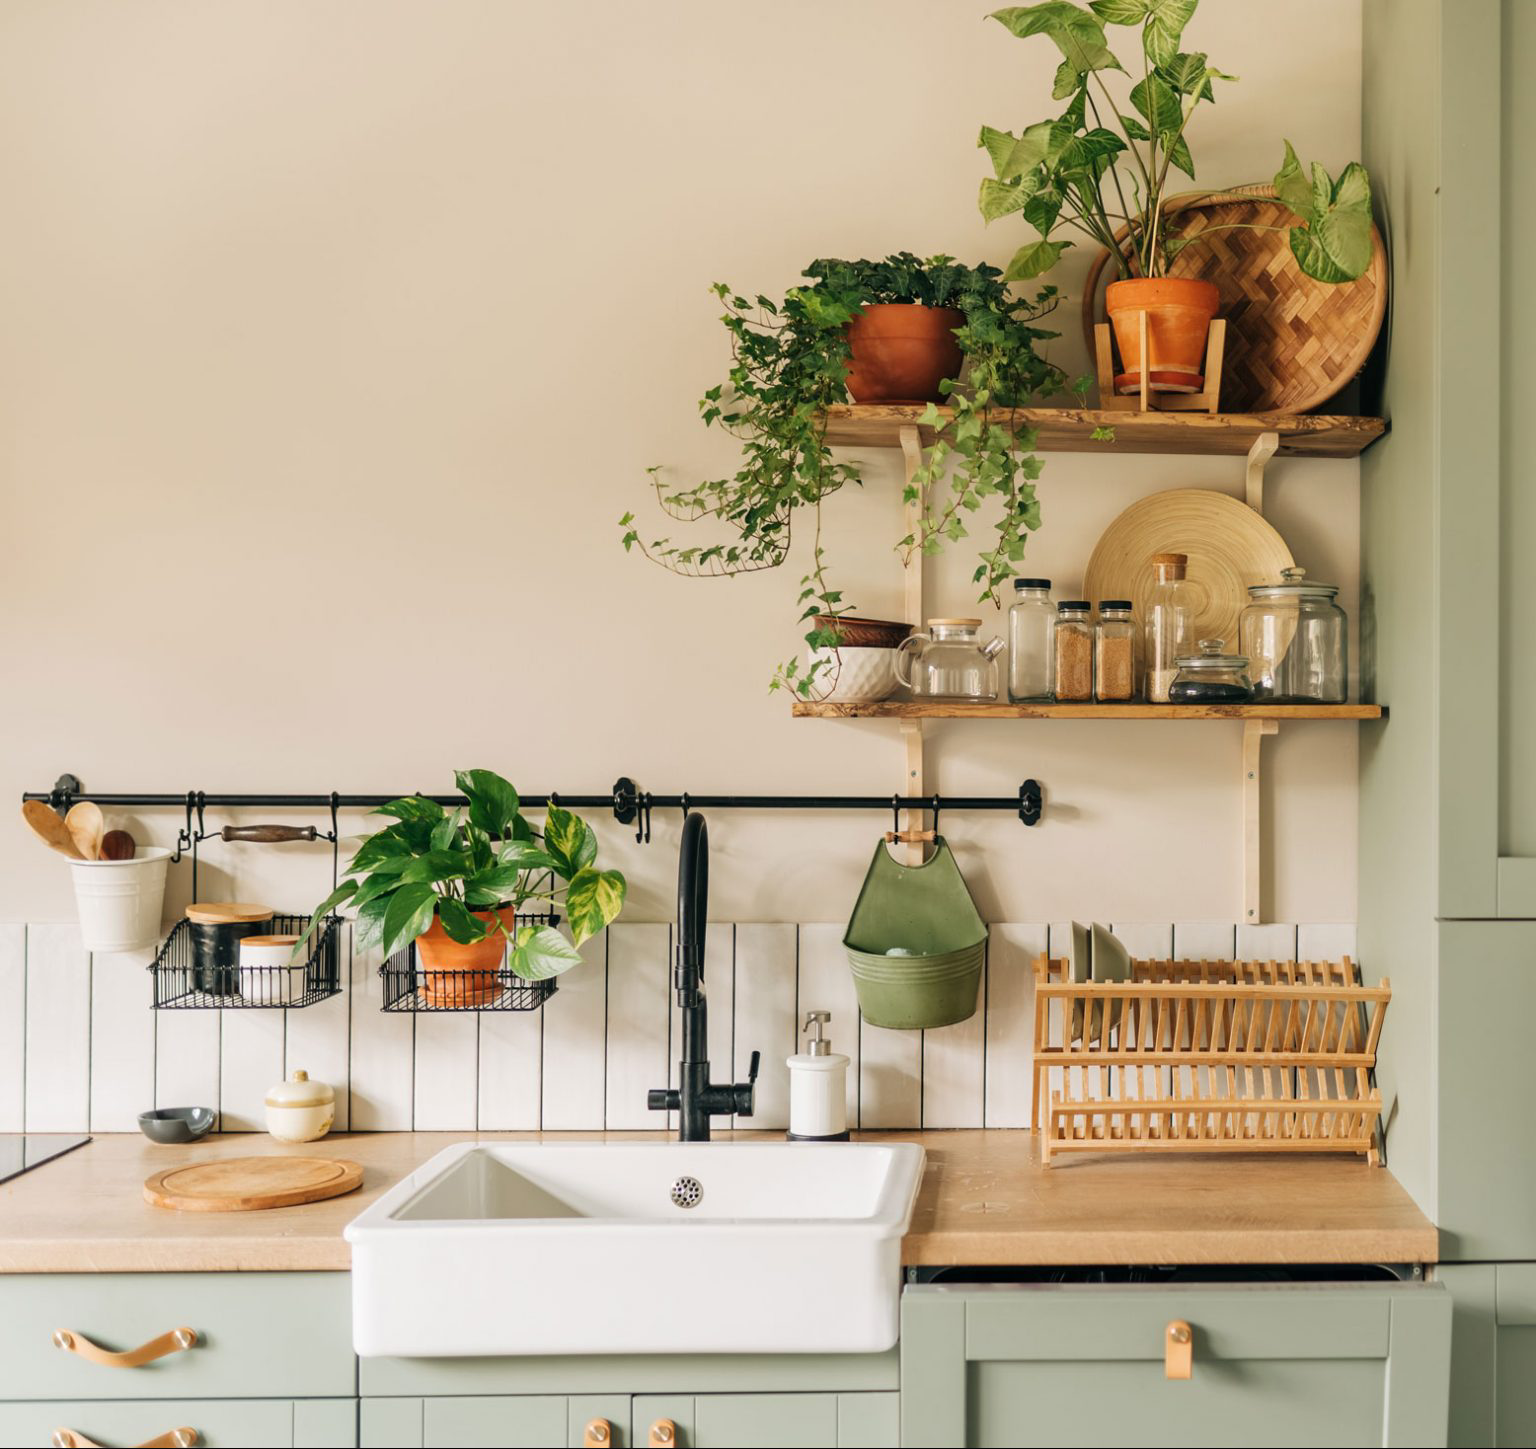 A bright kitchen filled with greenery.